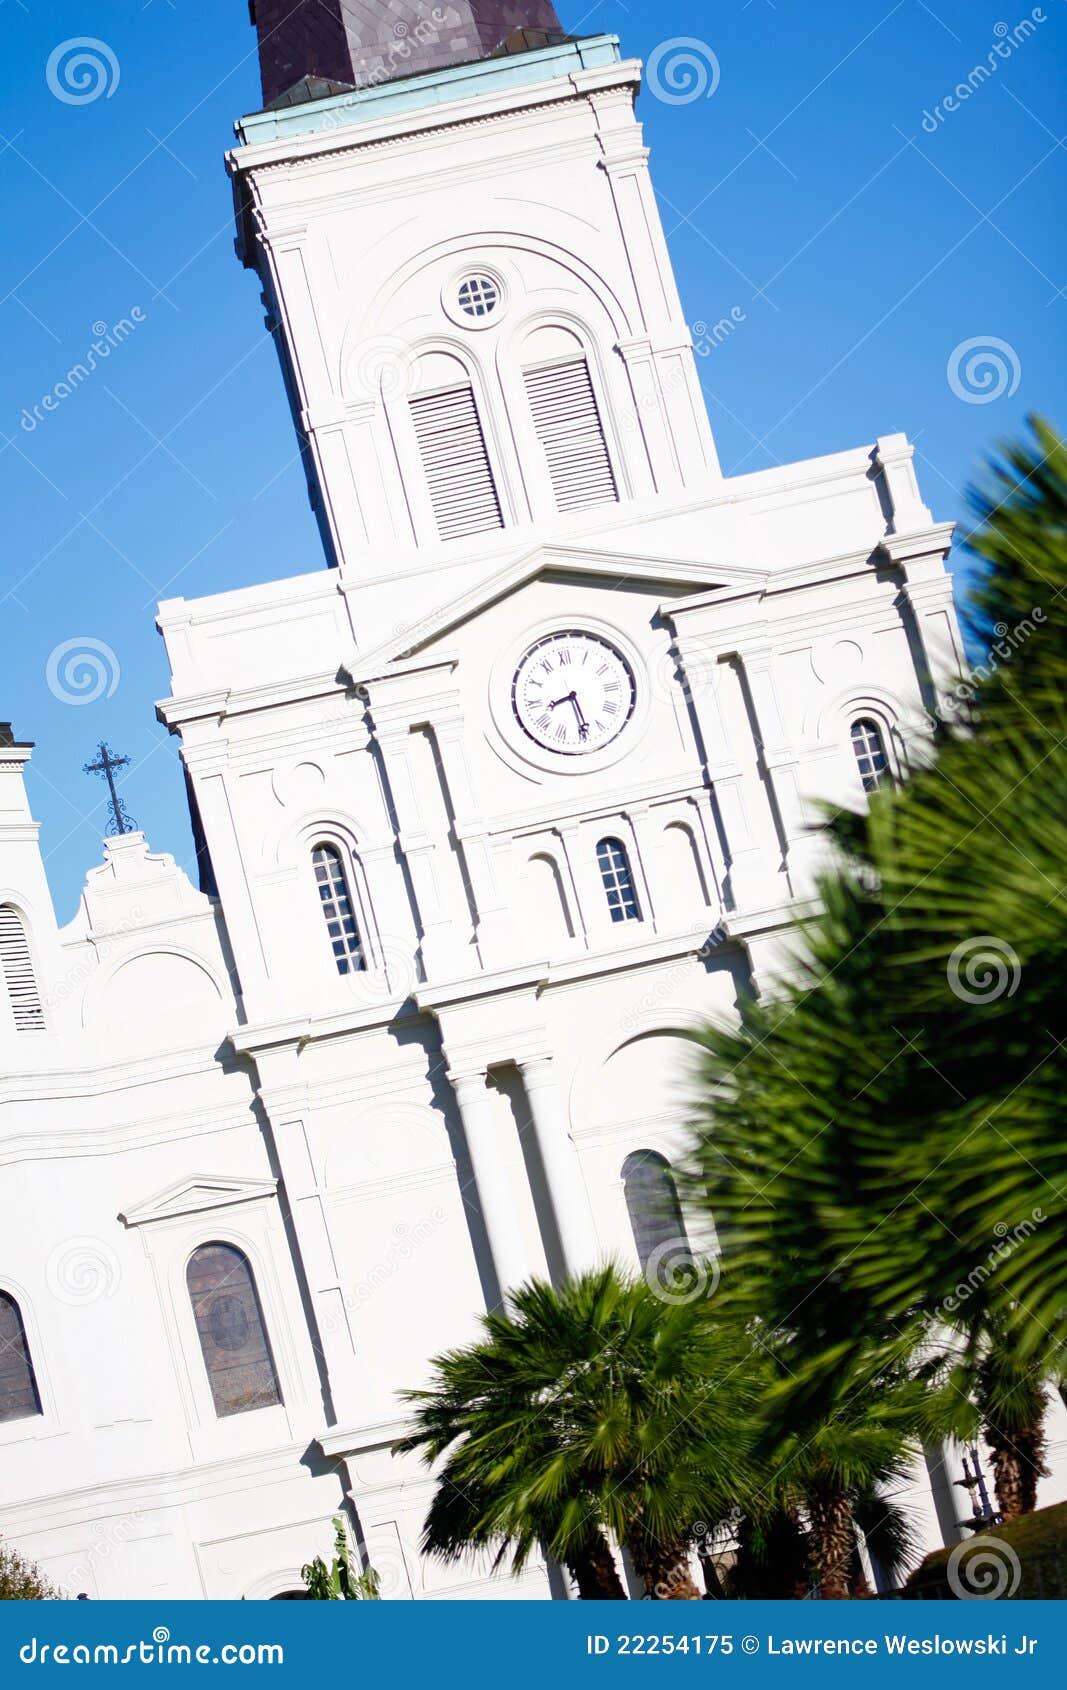 New Orleans St Louis Cathedral Clock Tower Stock Image - Image of church, landmark: 22254175